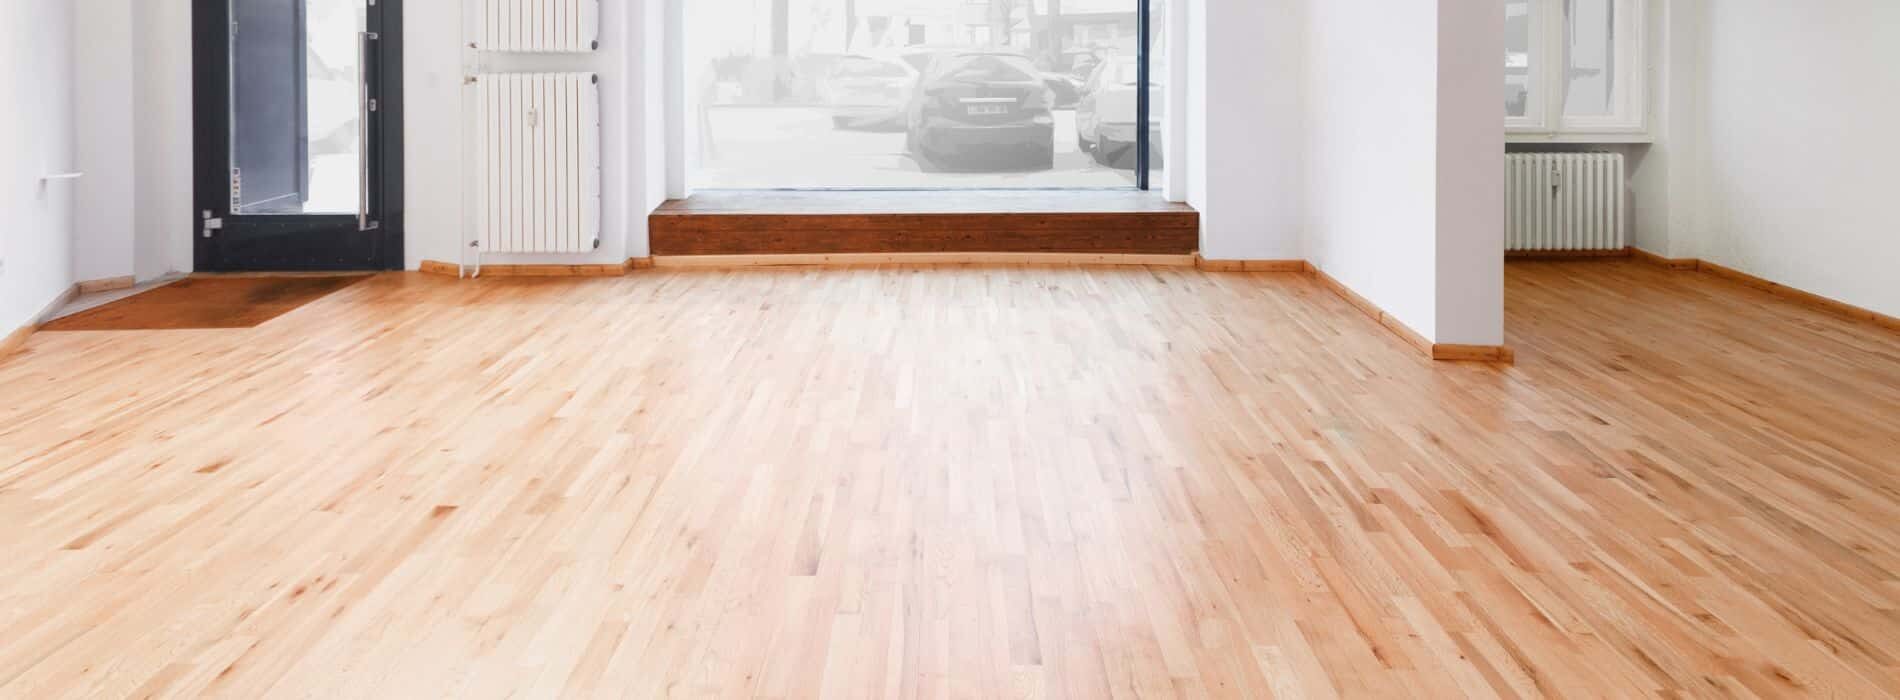 Expertly restored 6-year-old hardwood floor in Nunhead, SE15. Bona 2K Frost whitewashing and Traffic HD 15% sheen matte lacquer used by Mr Sander®. Durable and stunning finish ensures long-lasting beauty. 